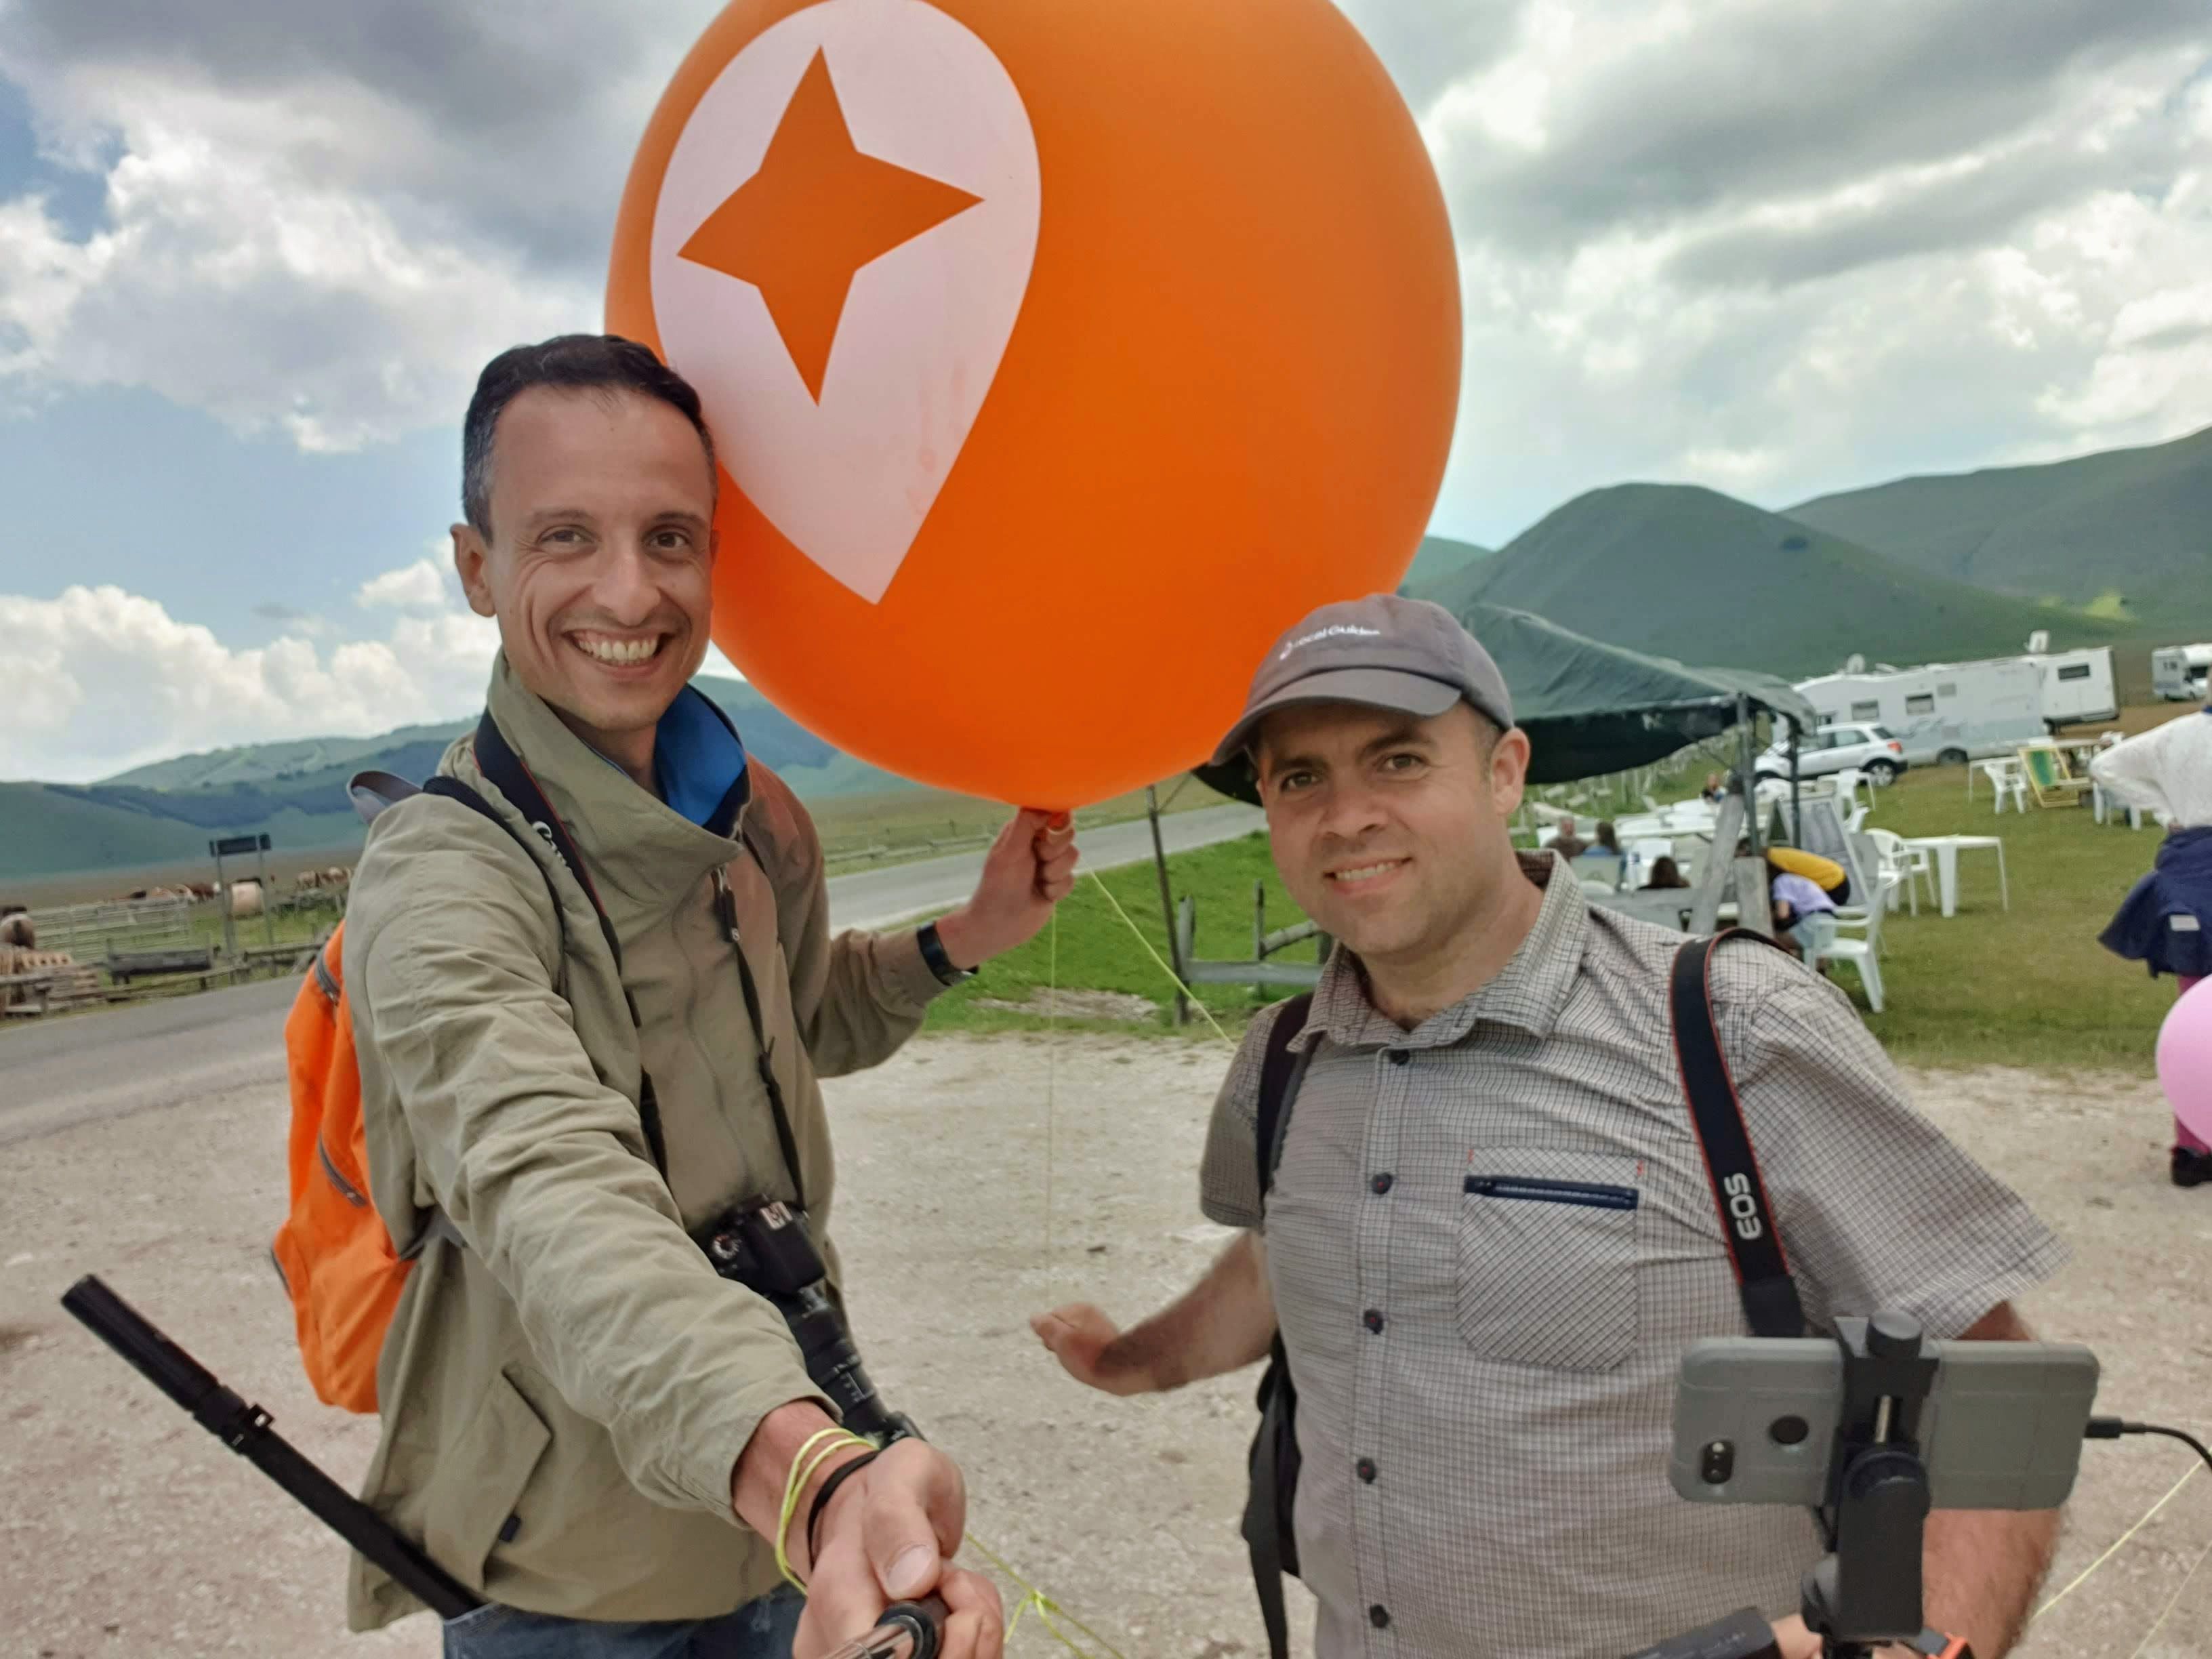 Selfie with @manulele81 while holding a big Local Guides balloon coming directly from Connect Live 2019 - Local guide @LuigiZ